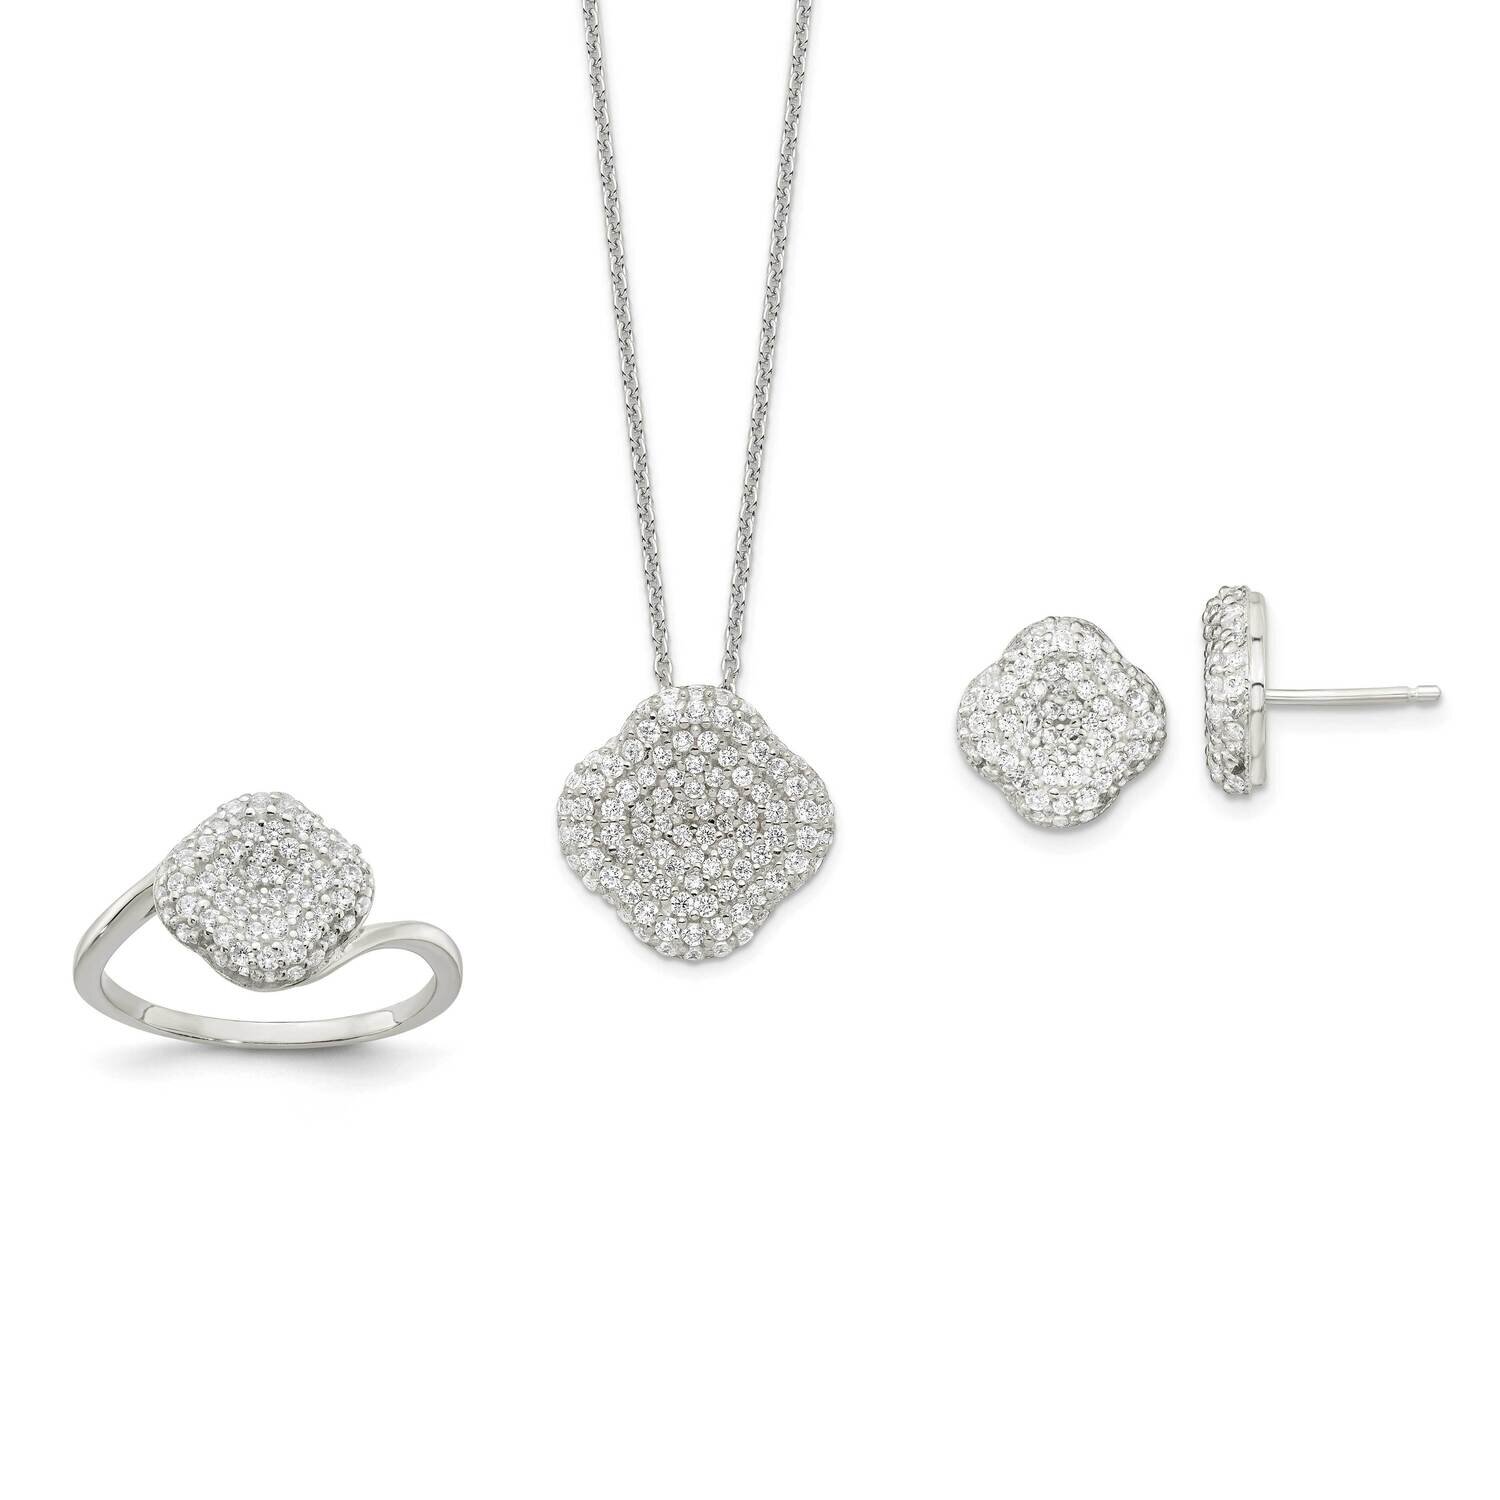 16 In with 1.5 In Extender CZ Diamond Square Necklace, Earrings and Rin 16 Inch Sterling Silver QST268